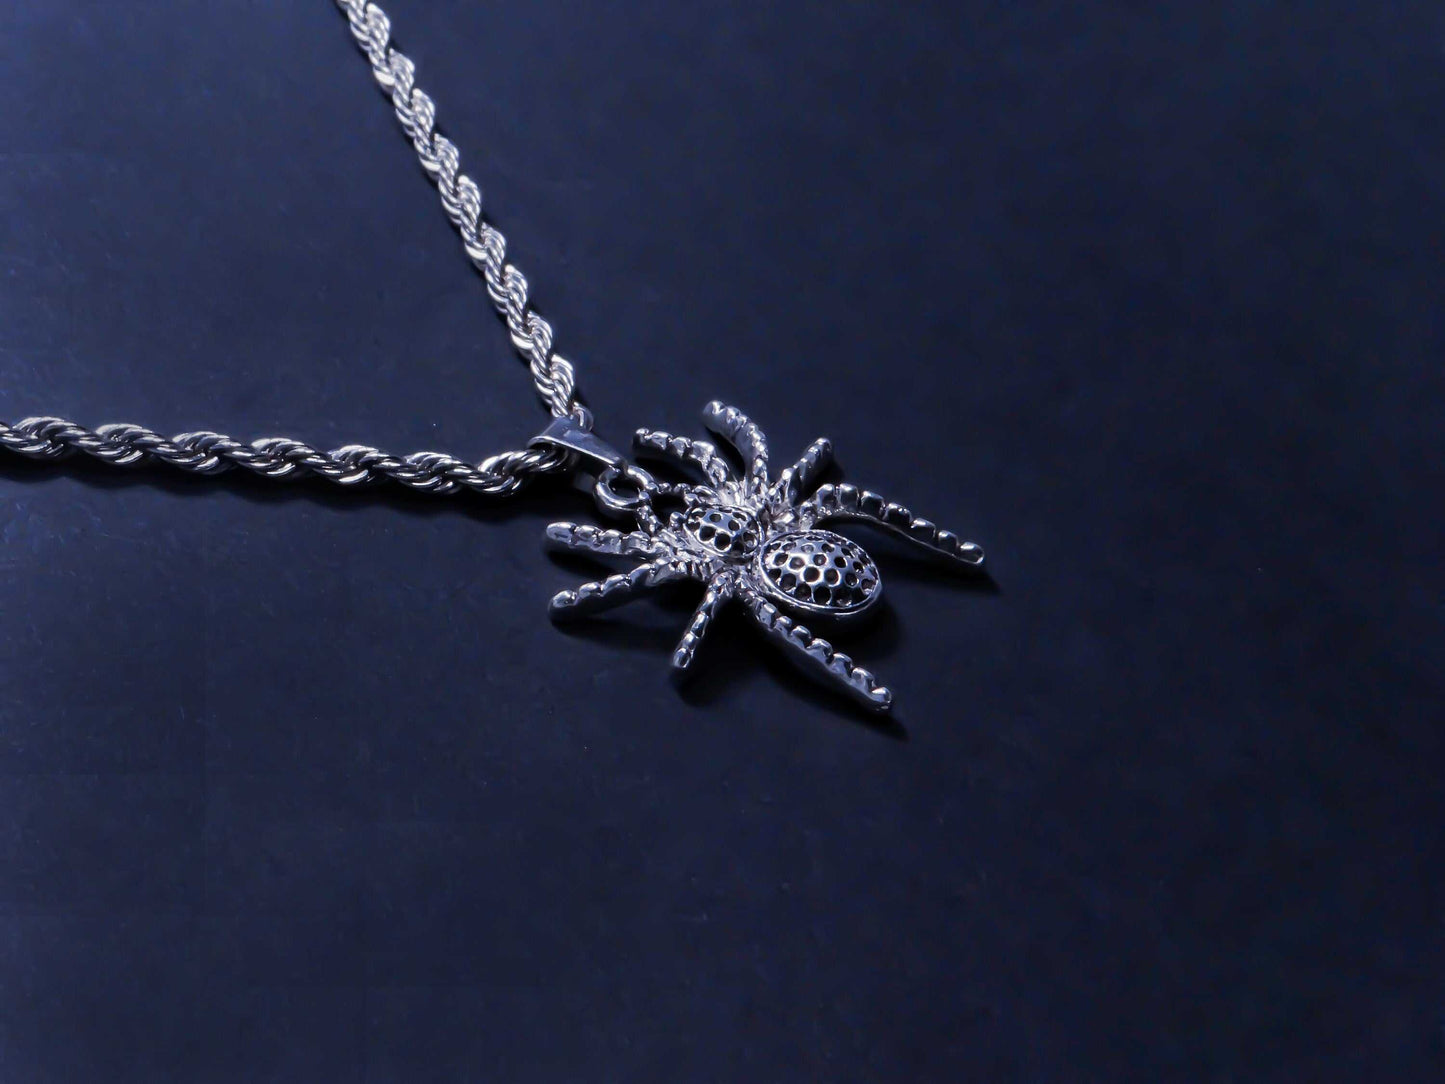 Polka Dot Spider Silver Rope Necklace